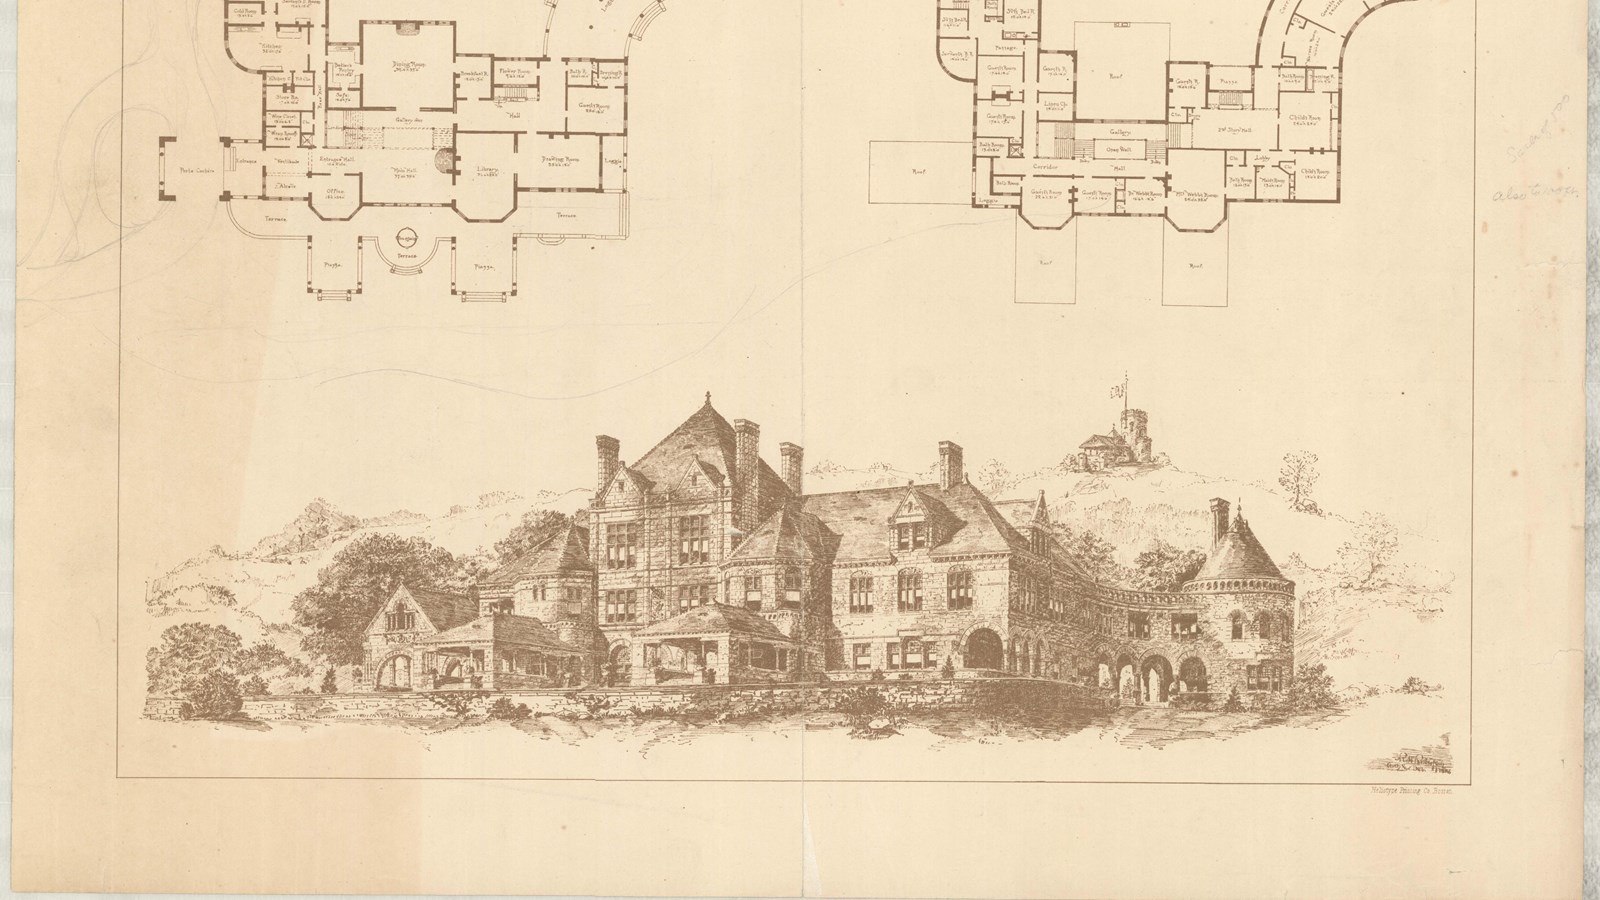 Pencil drawing of large home with stone wall in front and trees in the back